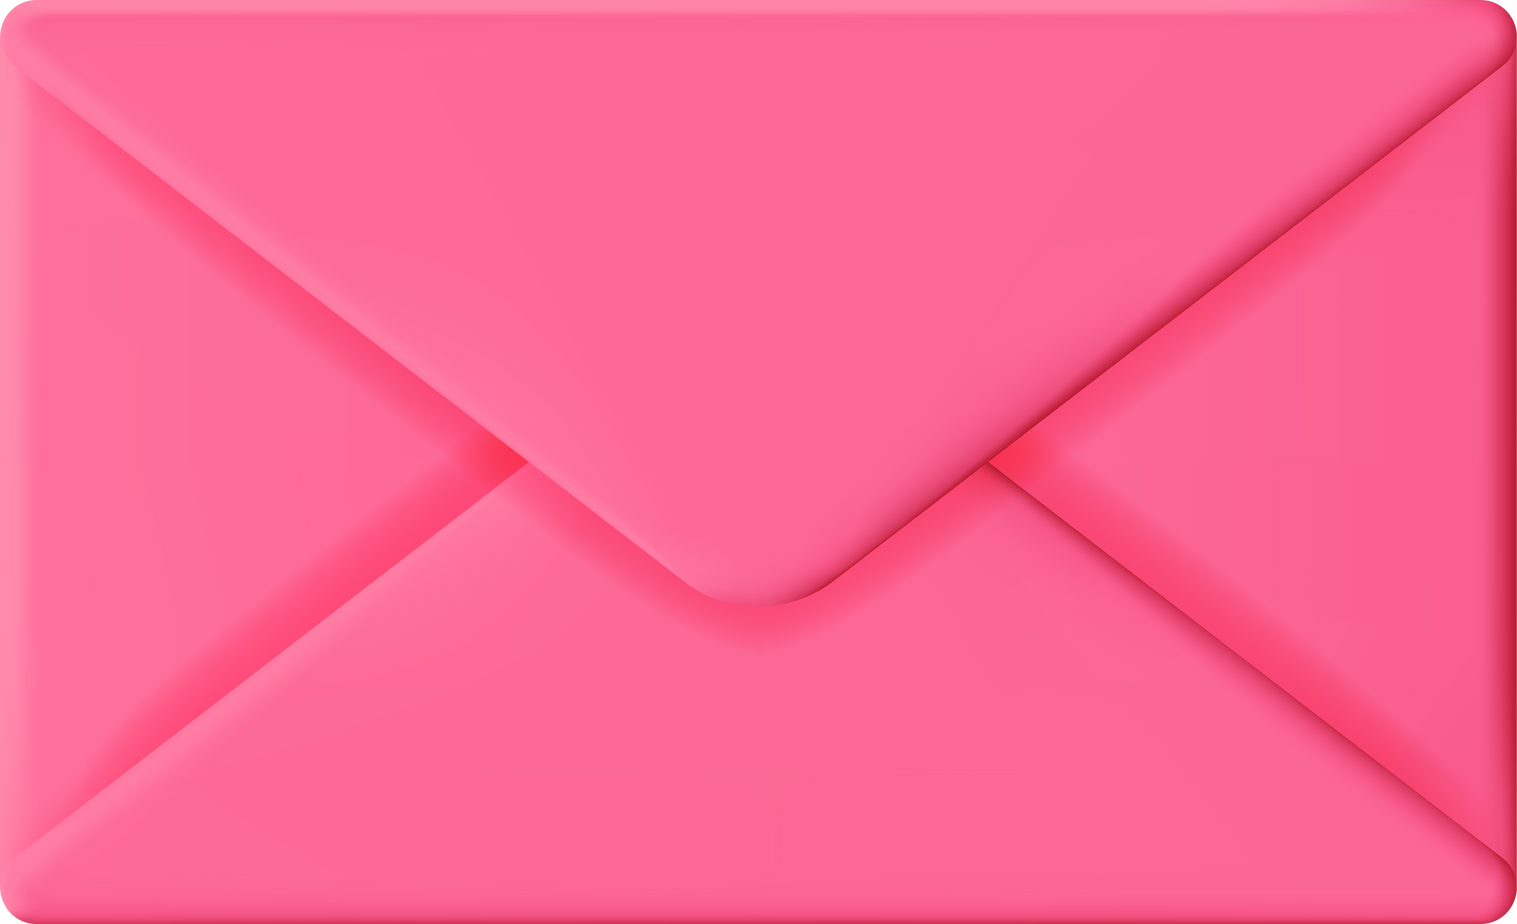 3D Pink Closed Mail Envelope